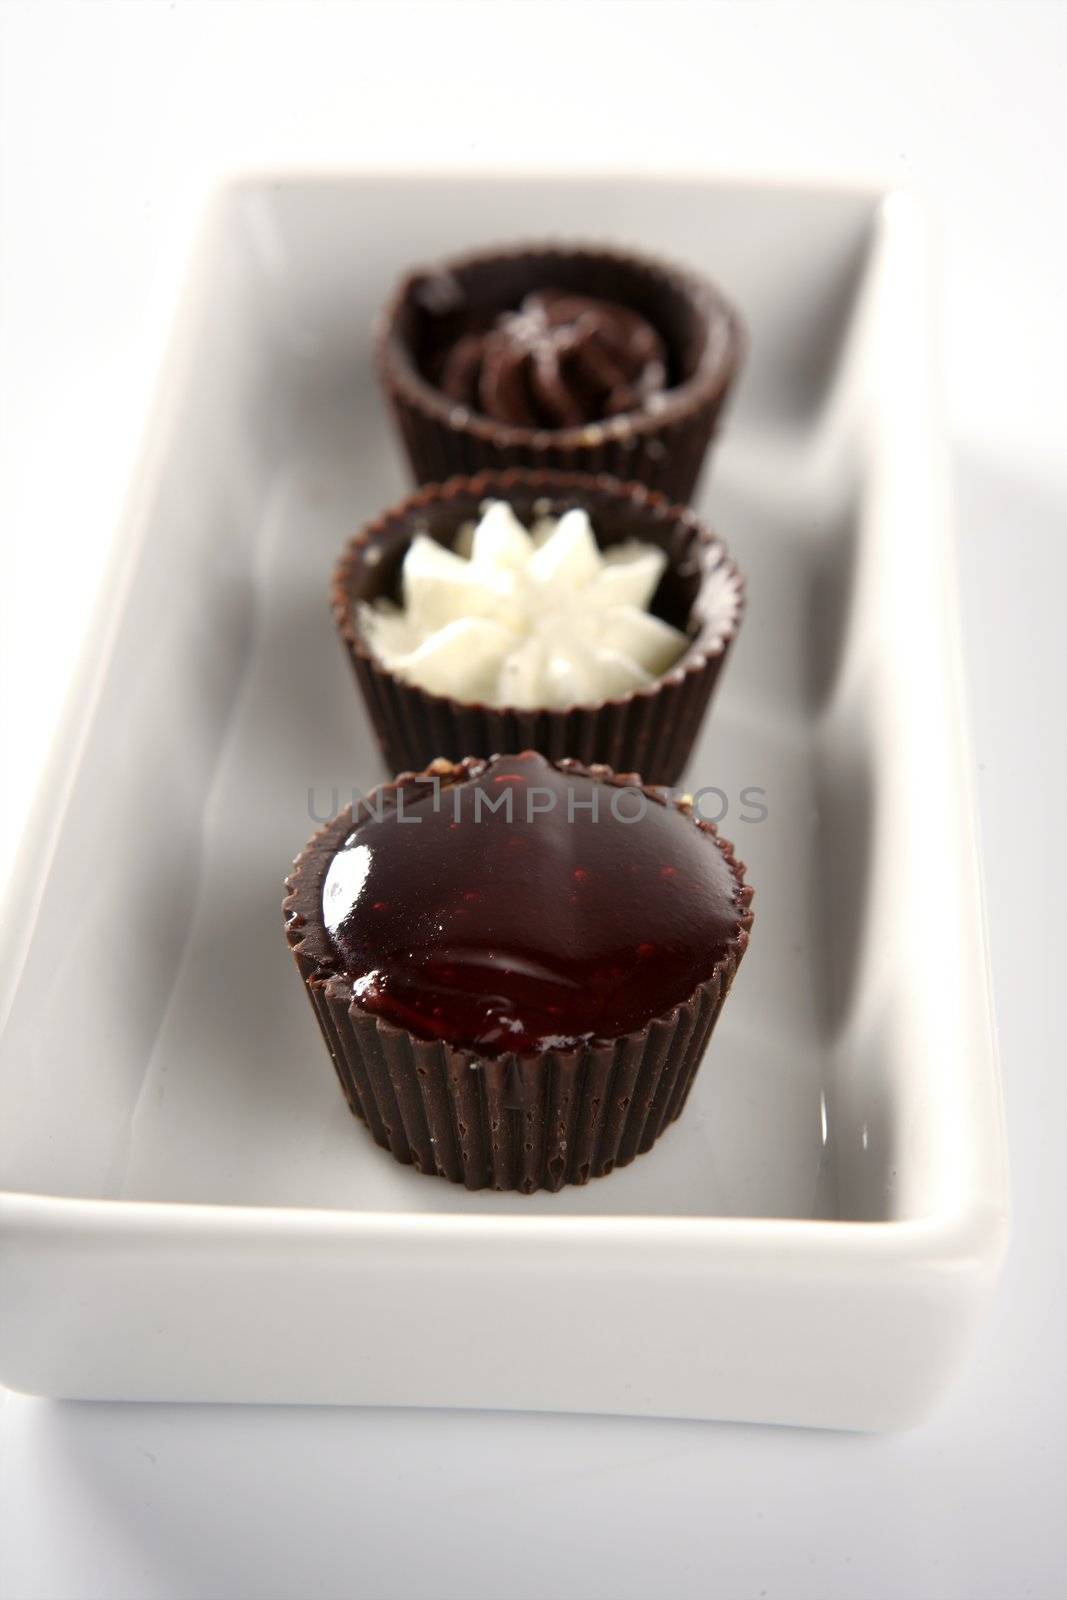 Three little chocolate cakes in a line with cream and strawberry jam